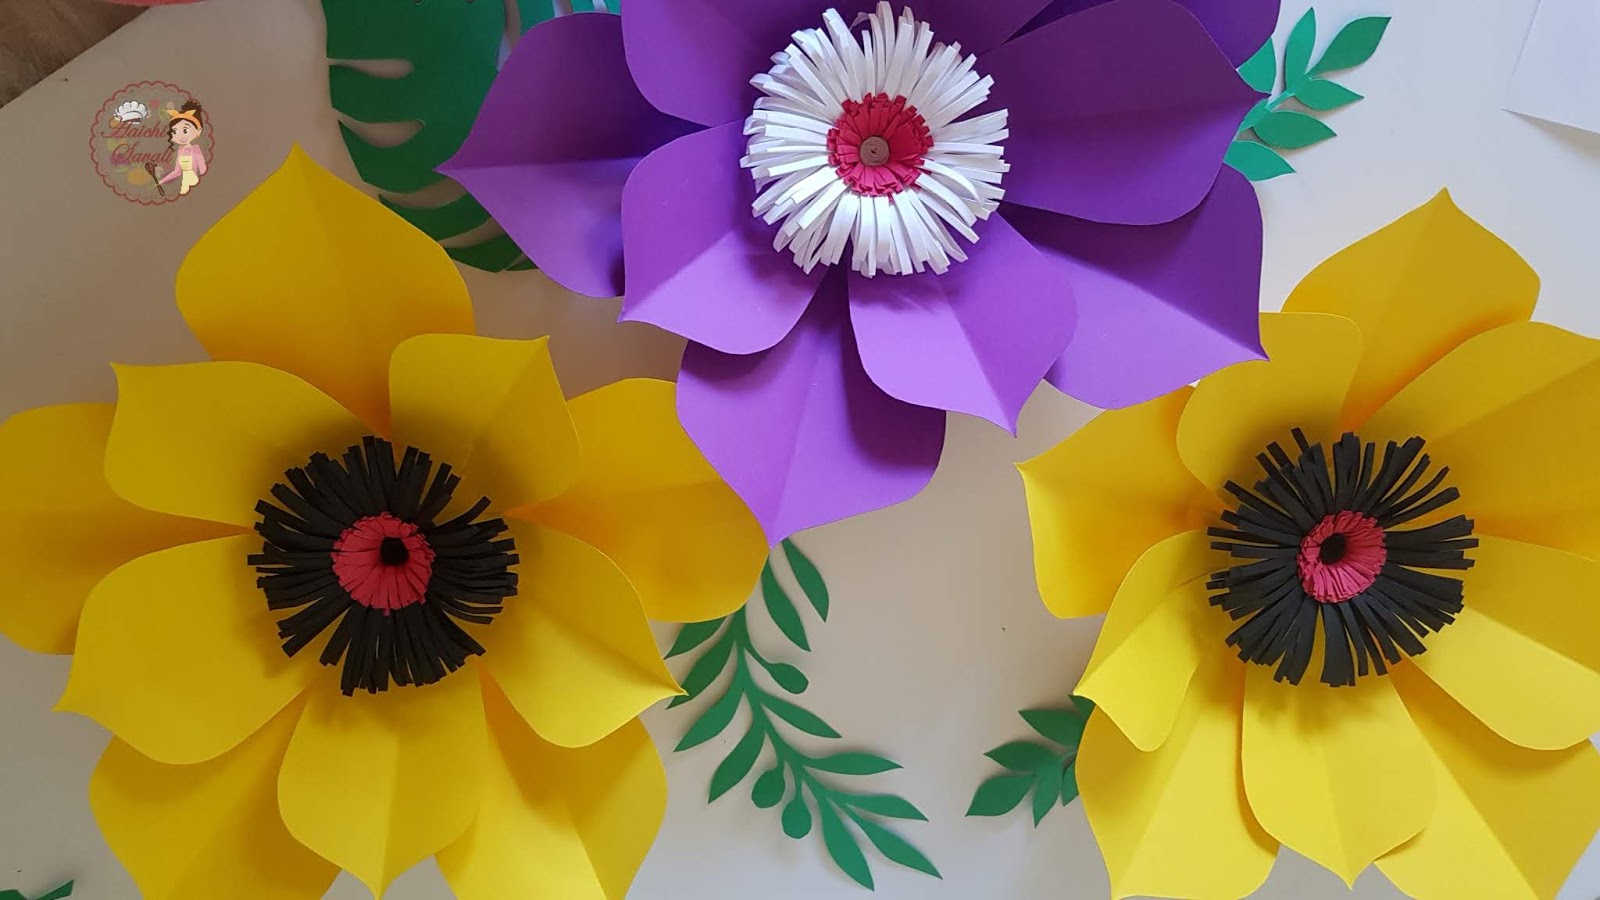 Cheerful Wall Decor Ideas With Paper Flowers